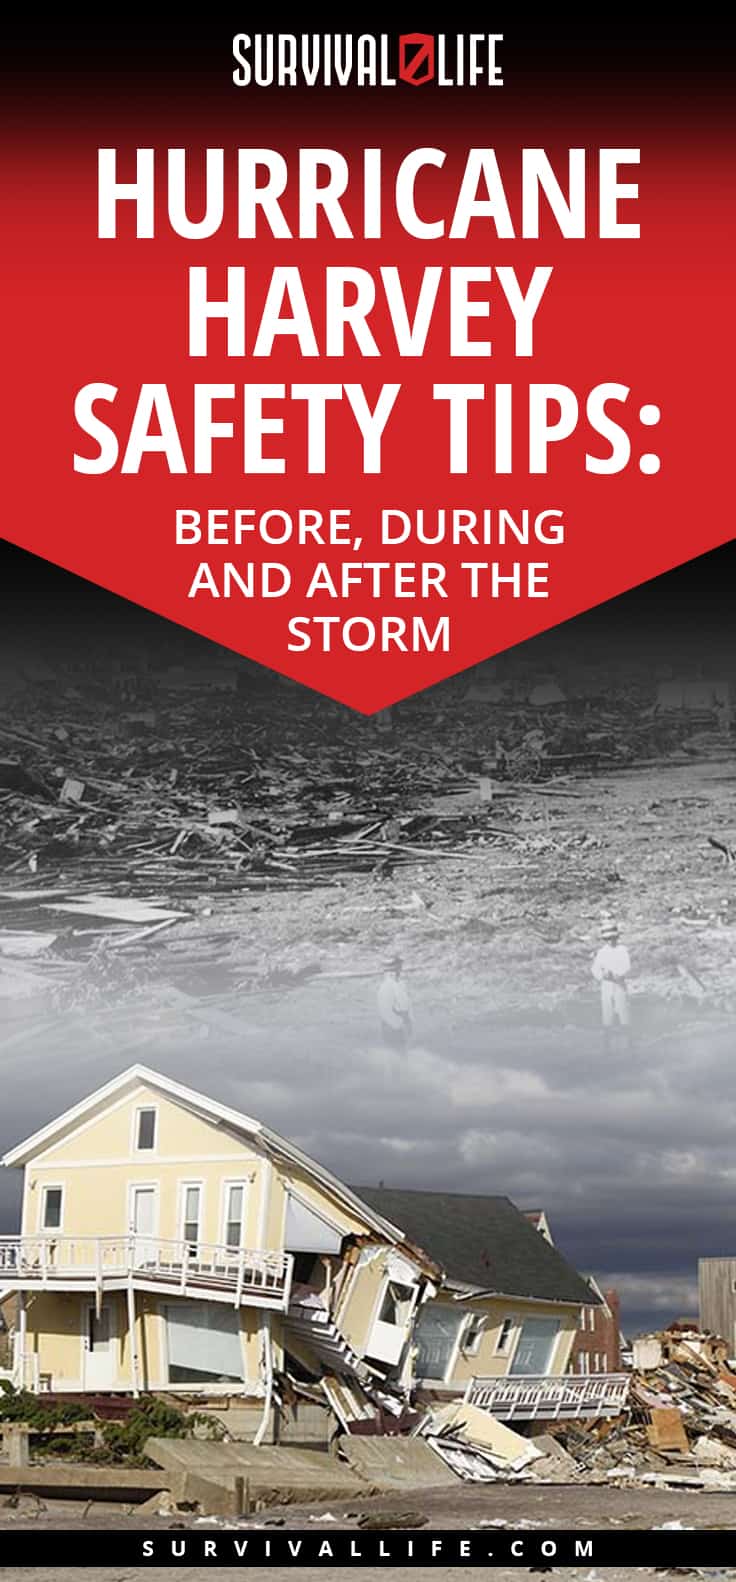 Hurricane Harvey Safety Tips: Before, During and After the Storm